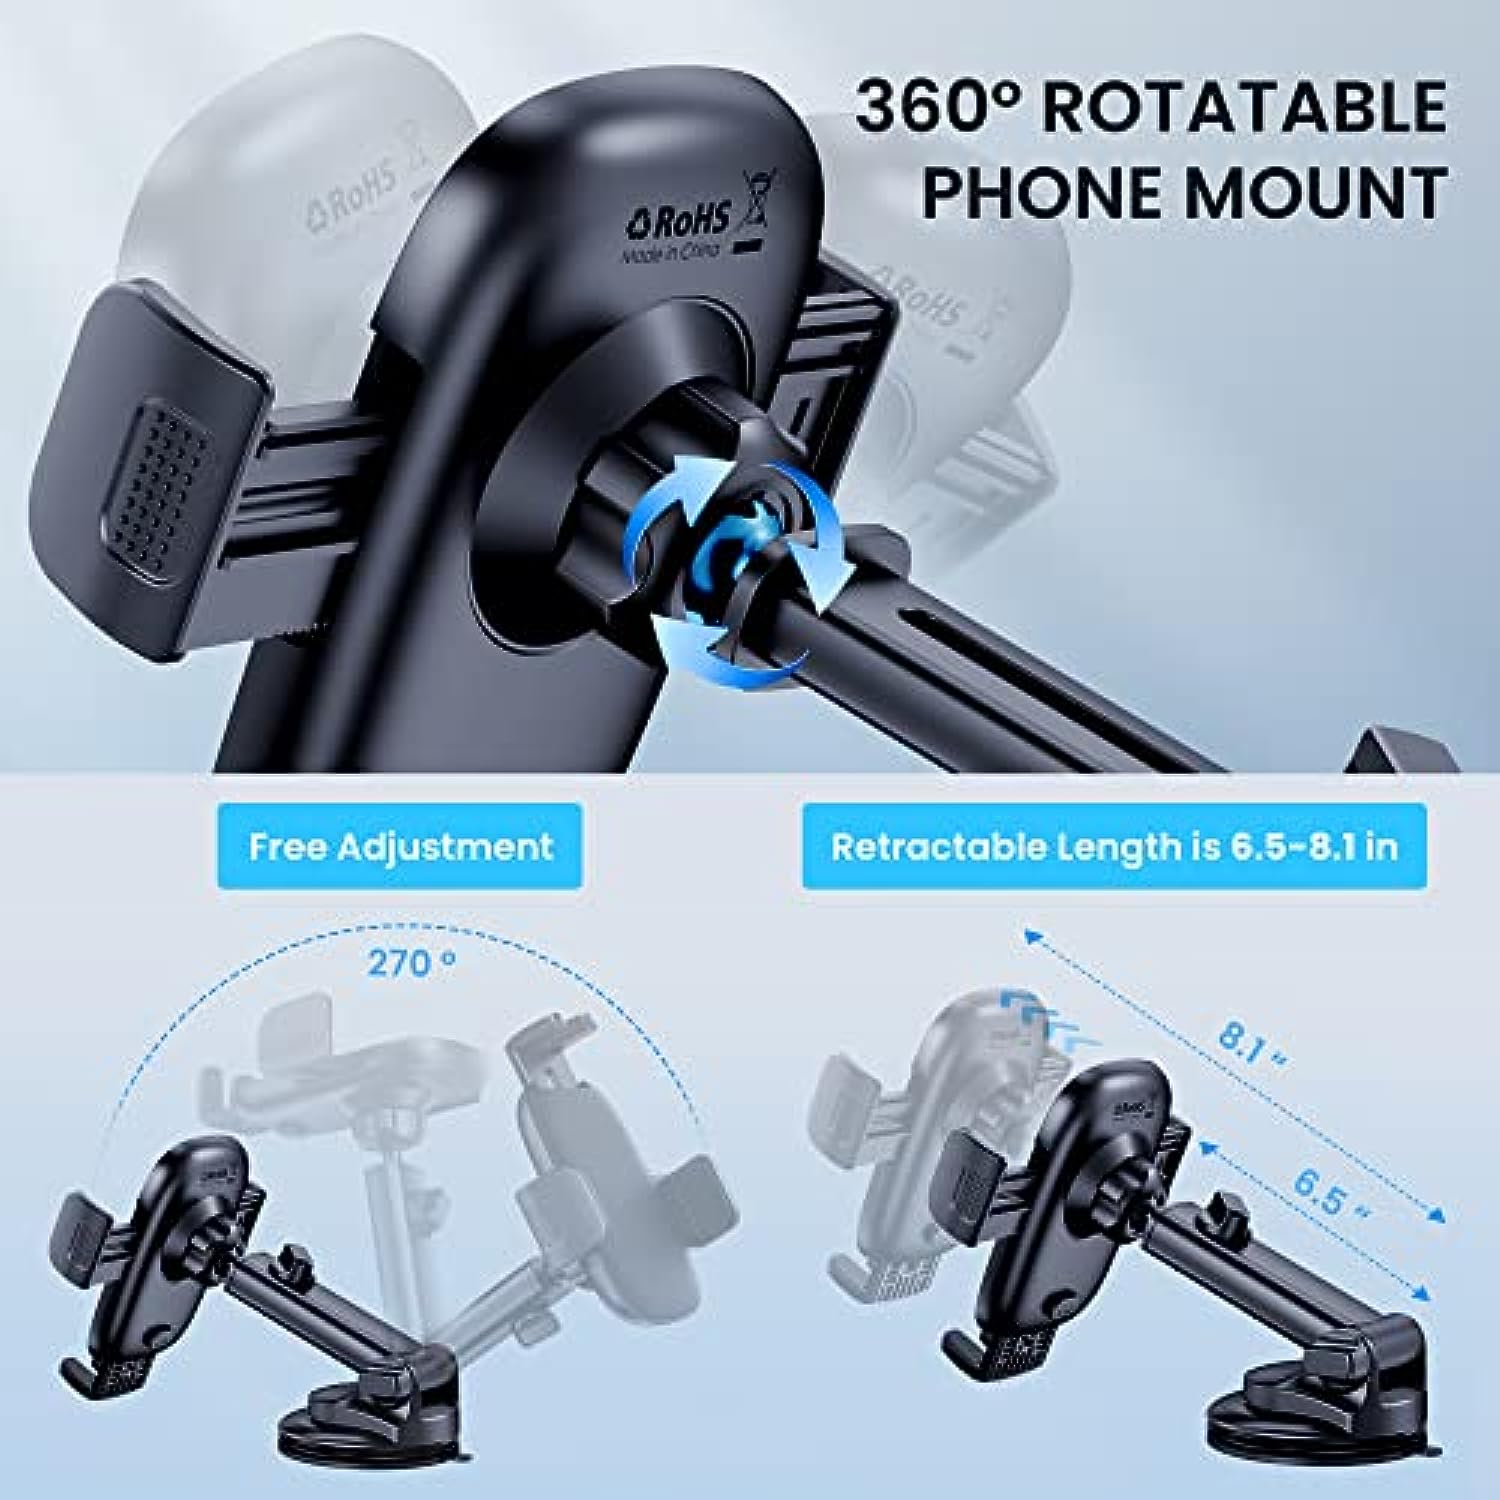 Military-Grade Suction & Stable Hook Phone Mount Fit for iPhone & Android Phone